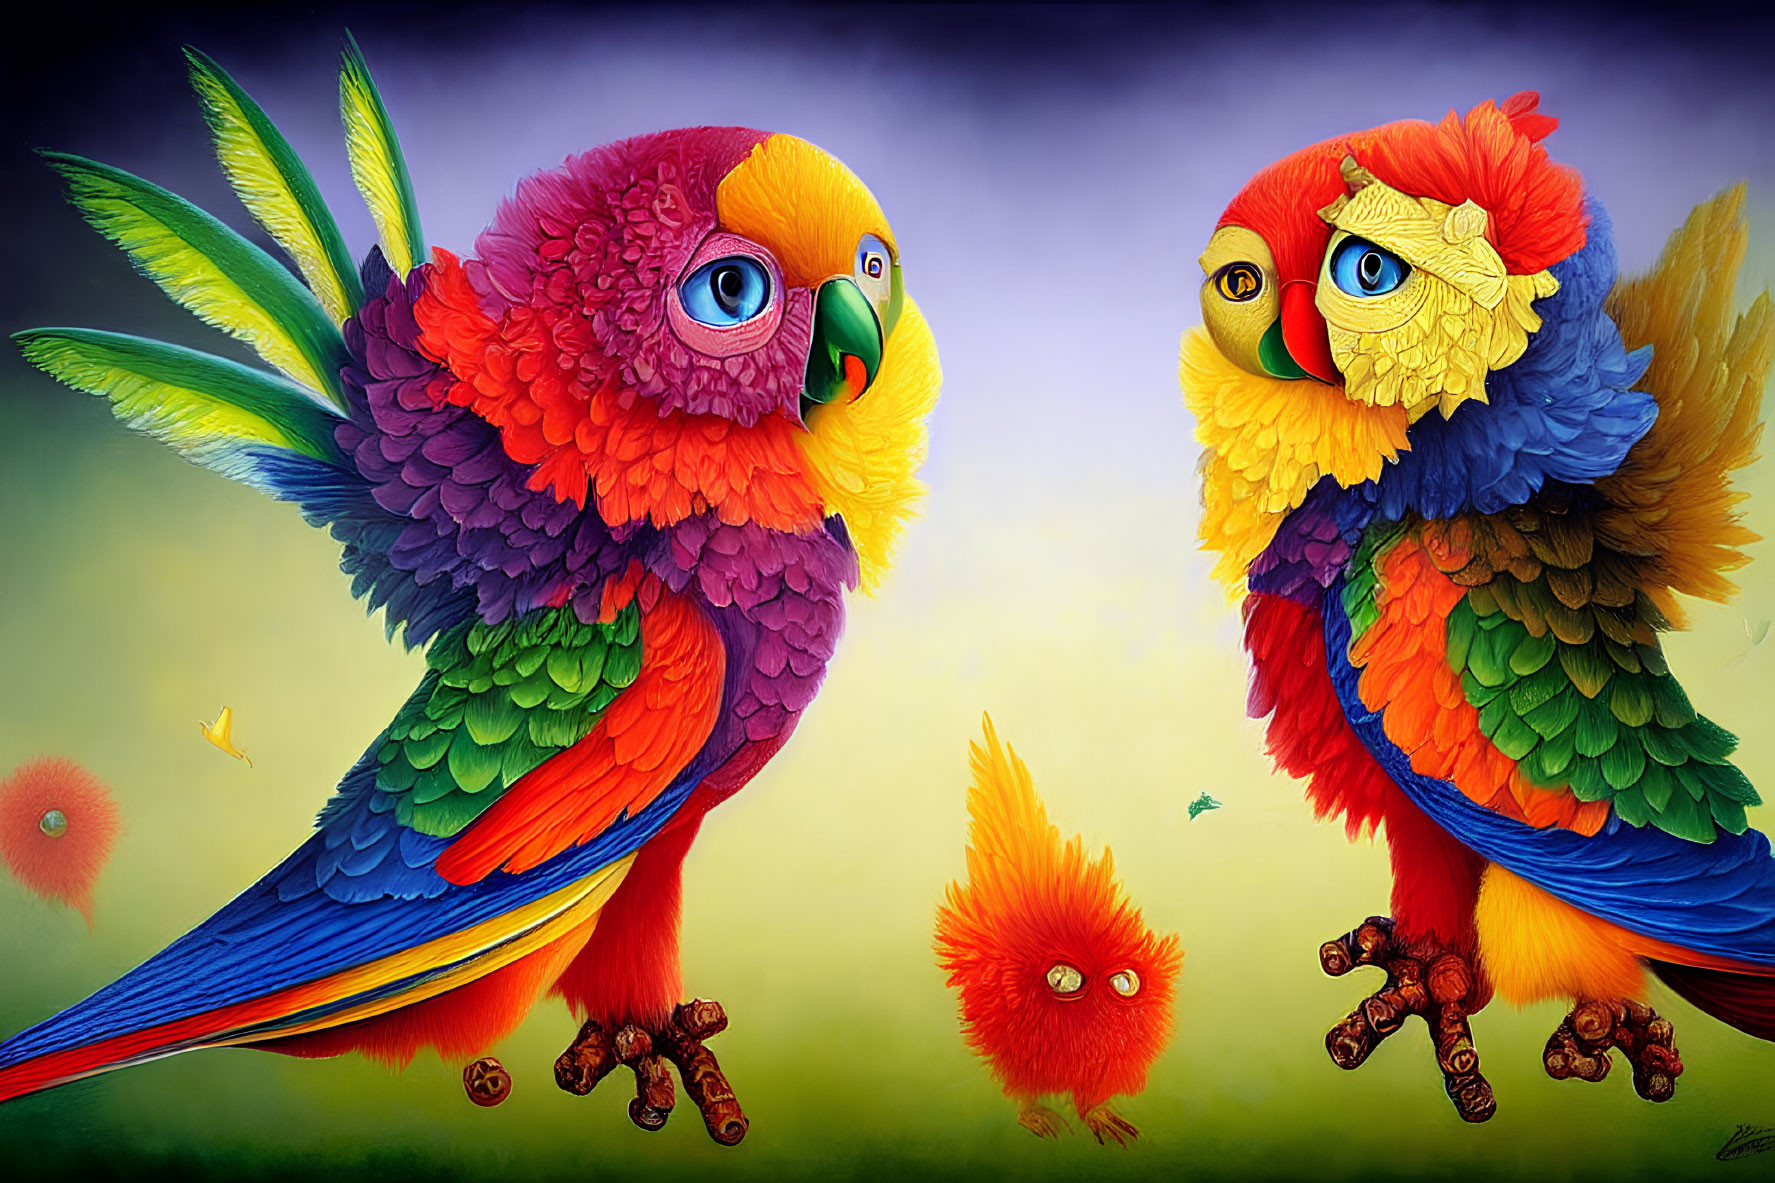 Colorful Stylized Parrots with Orange Creature on Gradient Background